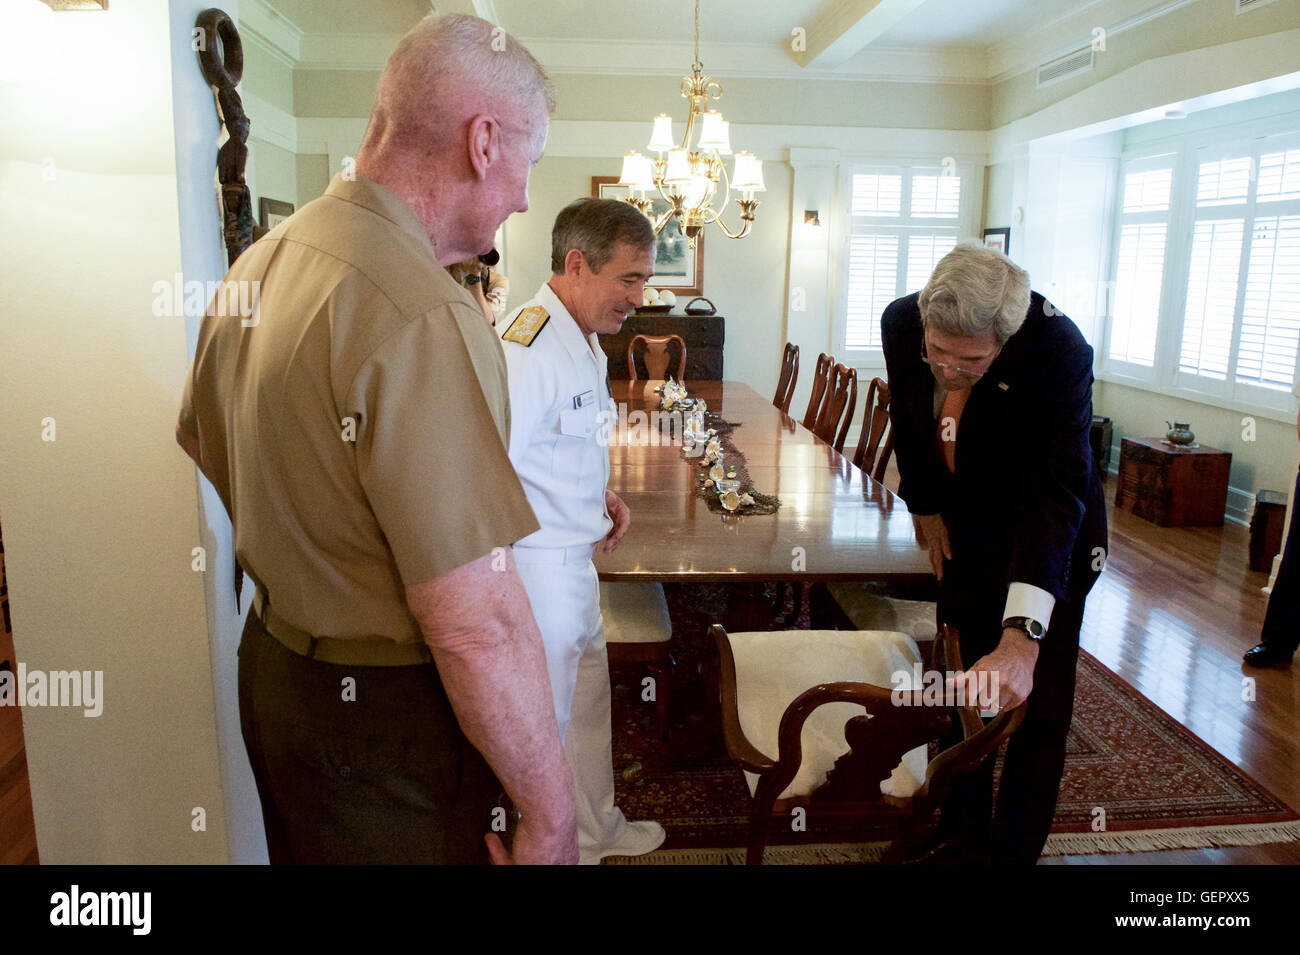 U.S. Navy Admiral Harris, With Lieutenant General Toolan, Shows Secretary Kerry the Nameplates Revealing the Dignitaries Who Have Sat at the Dining Room Table in His Quarters at Joint Base Pearl Harbor-Hickam in Hawaii Stock Photo